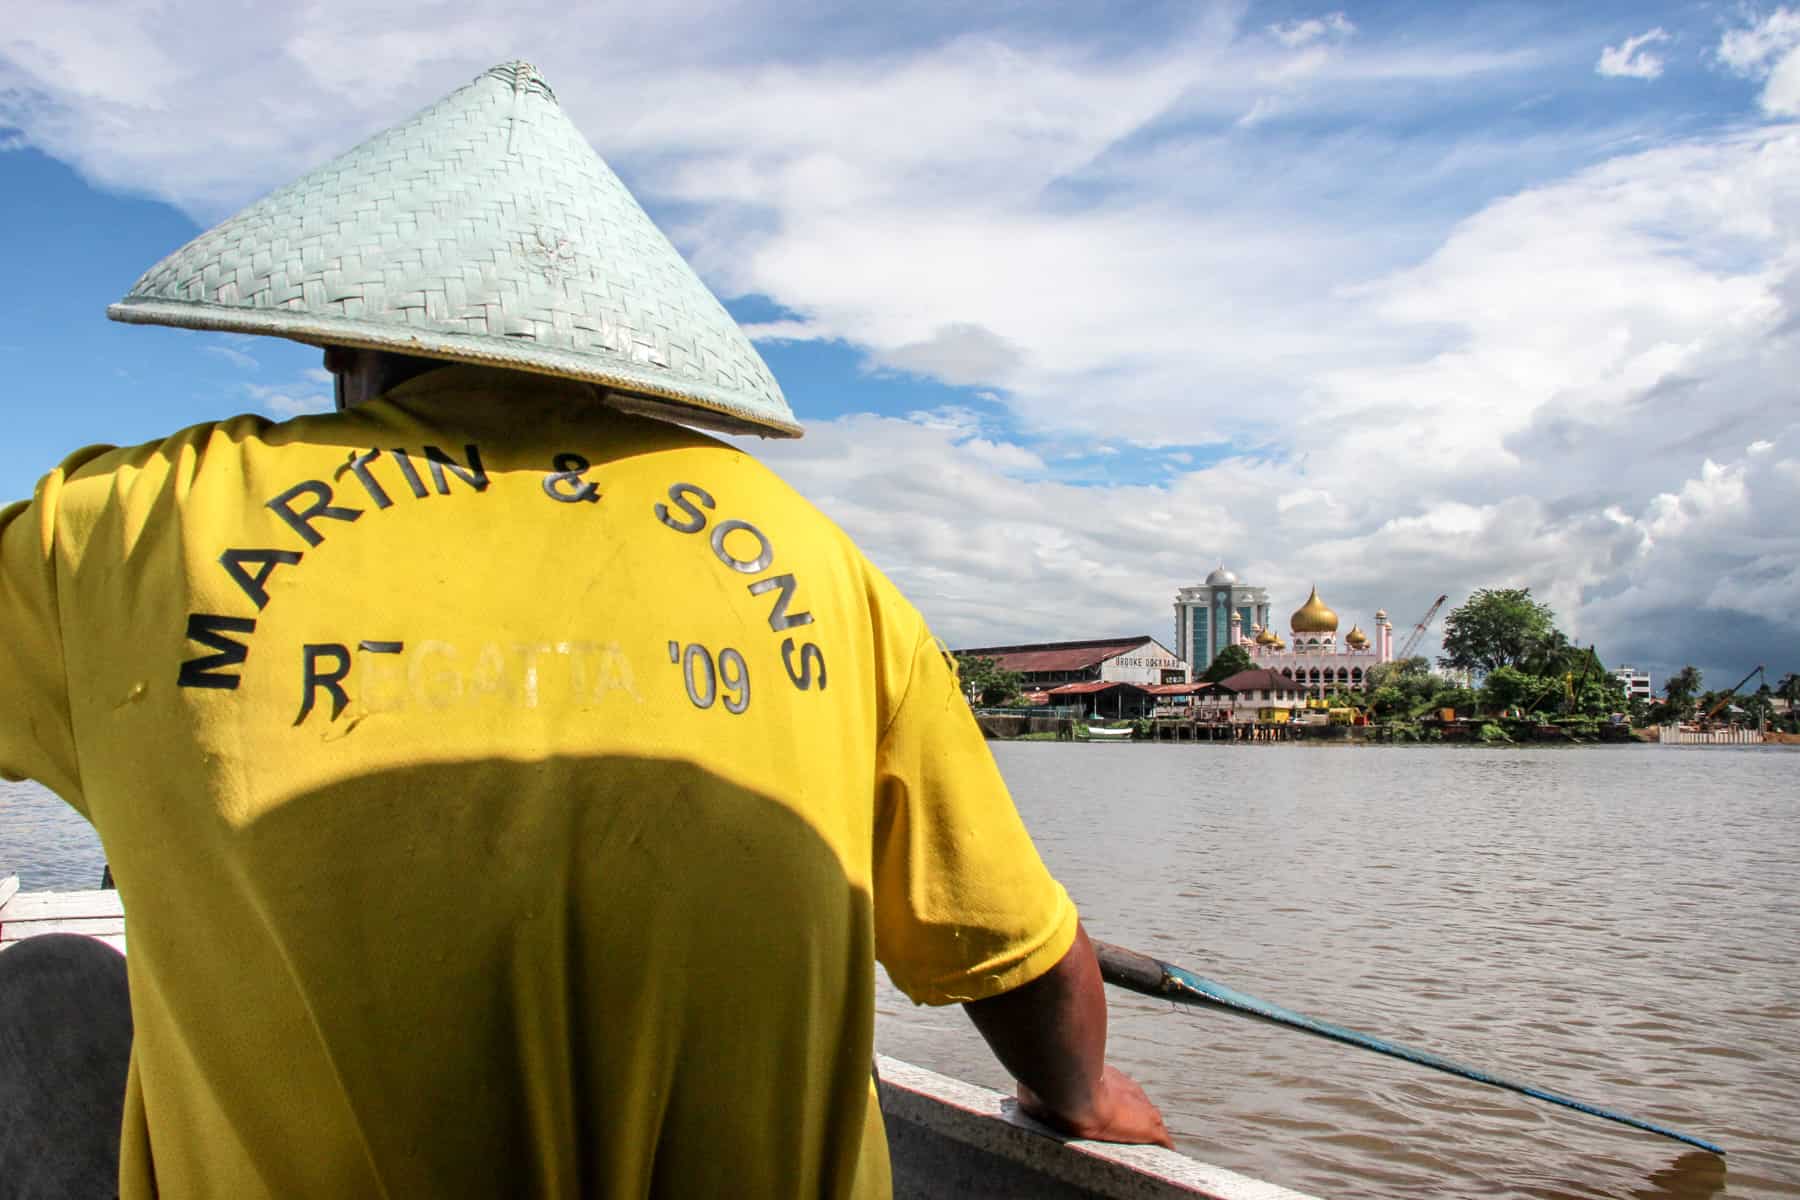 A man in a yellow t-shit and a triangular hat, uses a wooden oar to row across the River Sarawak in Kuching as a water taxi service